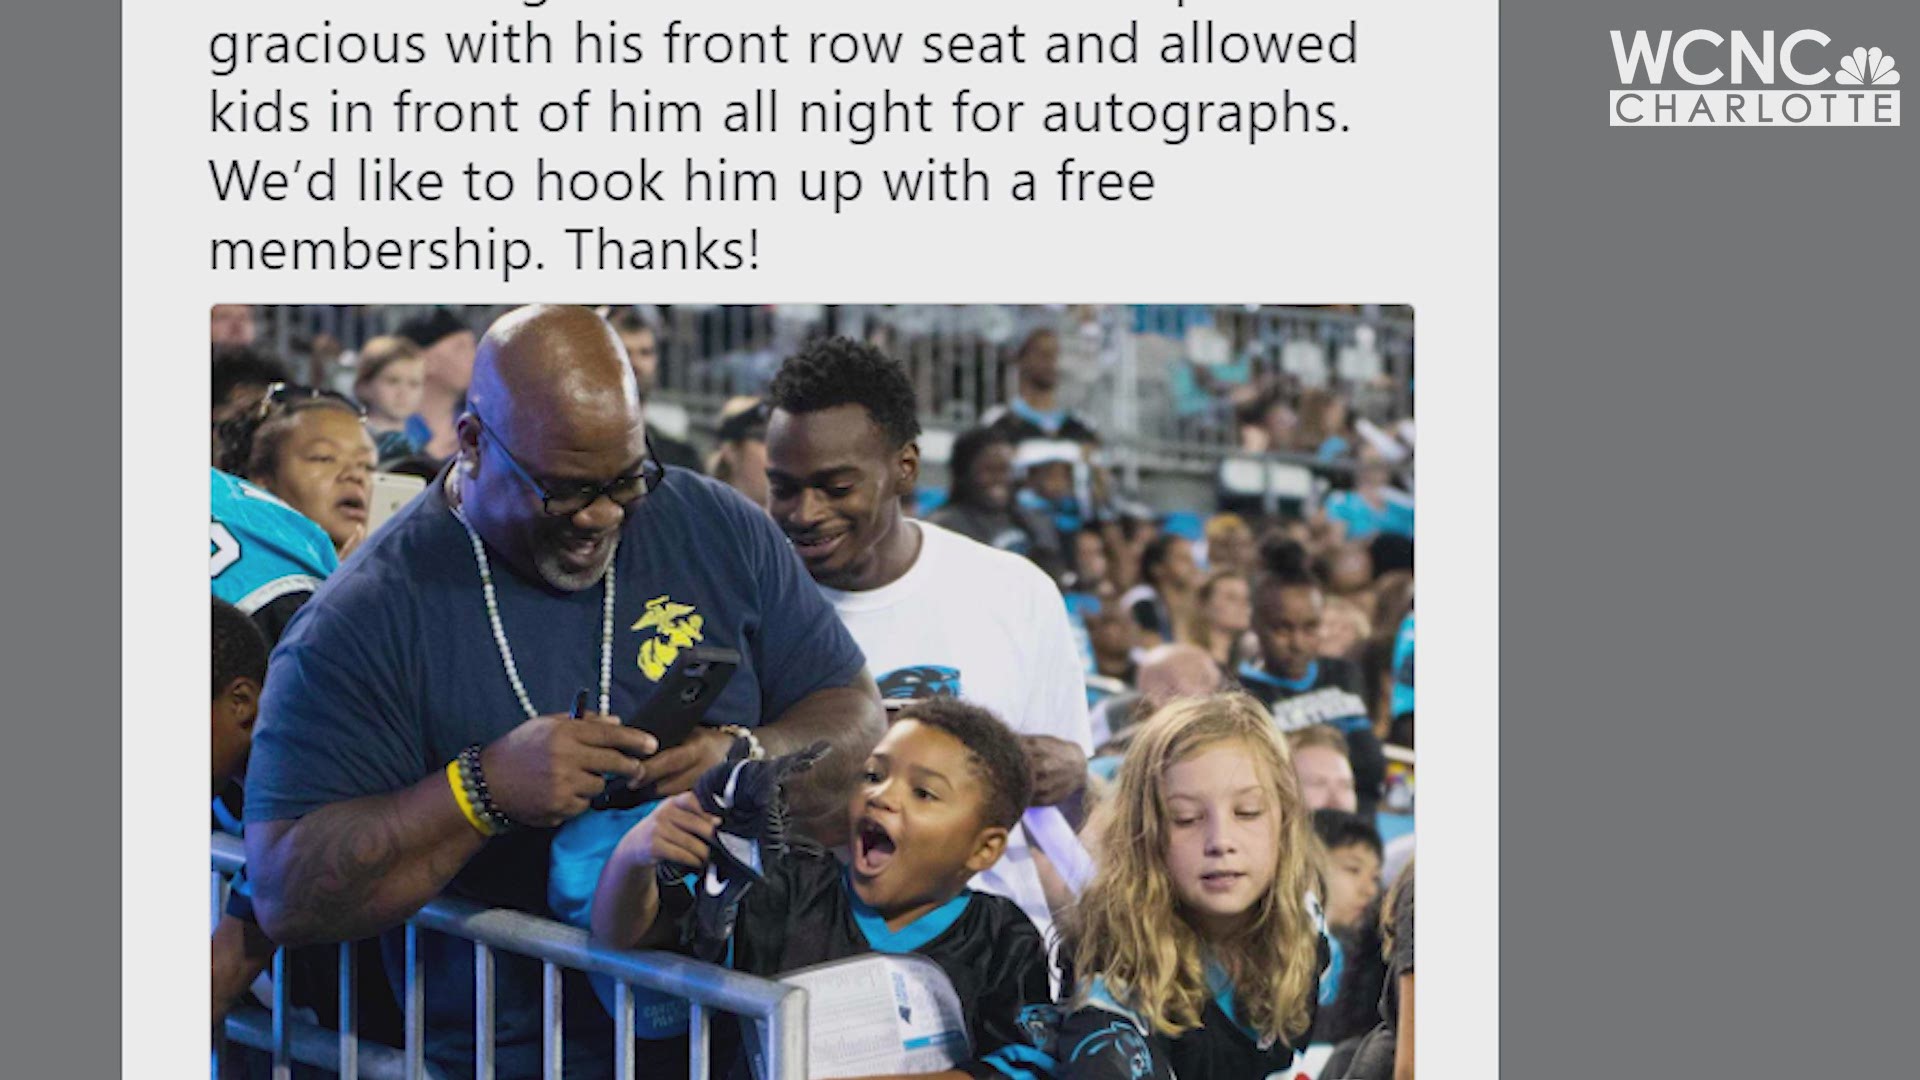 Gracious man being praised for allowing kids to jump in front of him at Panthers Fan Fest